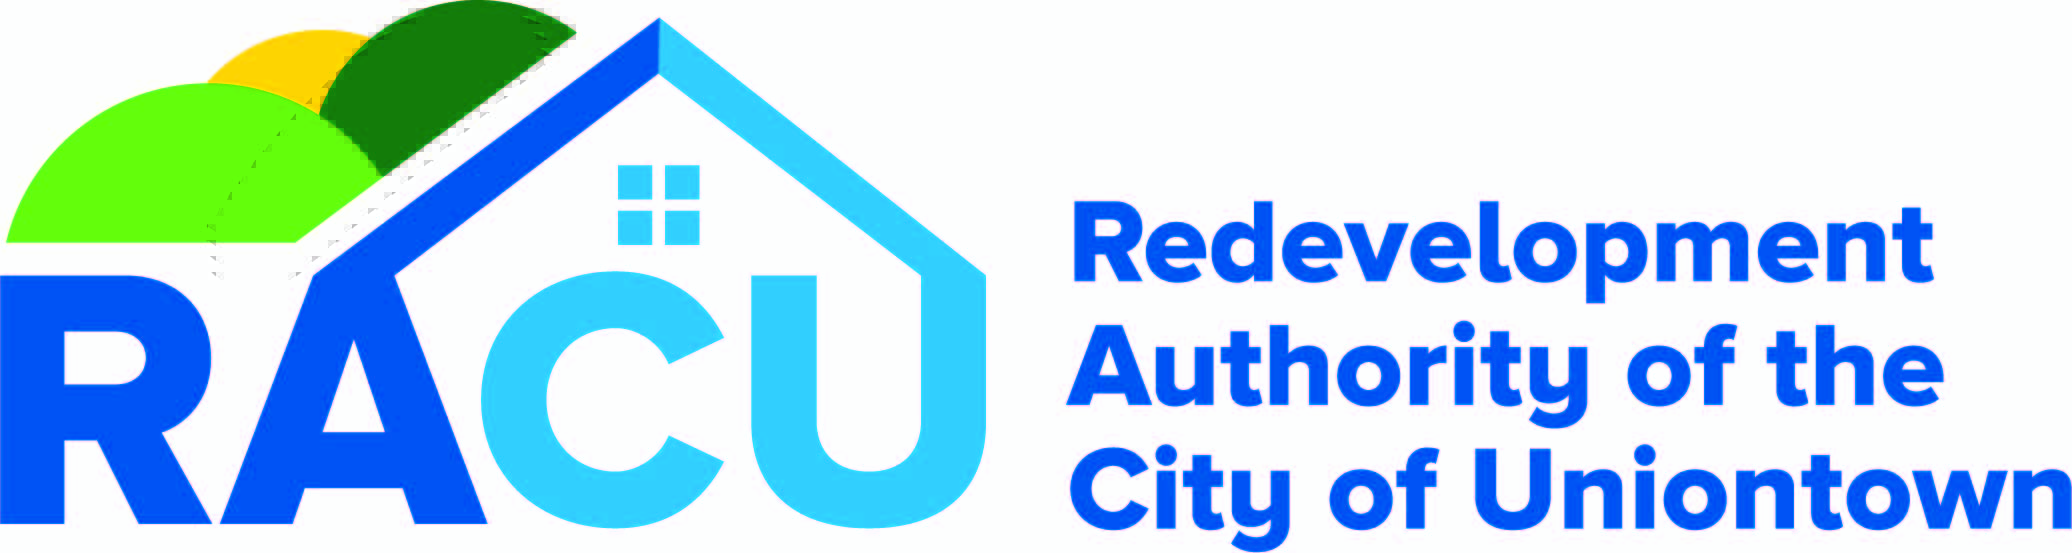 Redevelopment Authority of the City of Uniontown